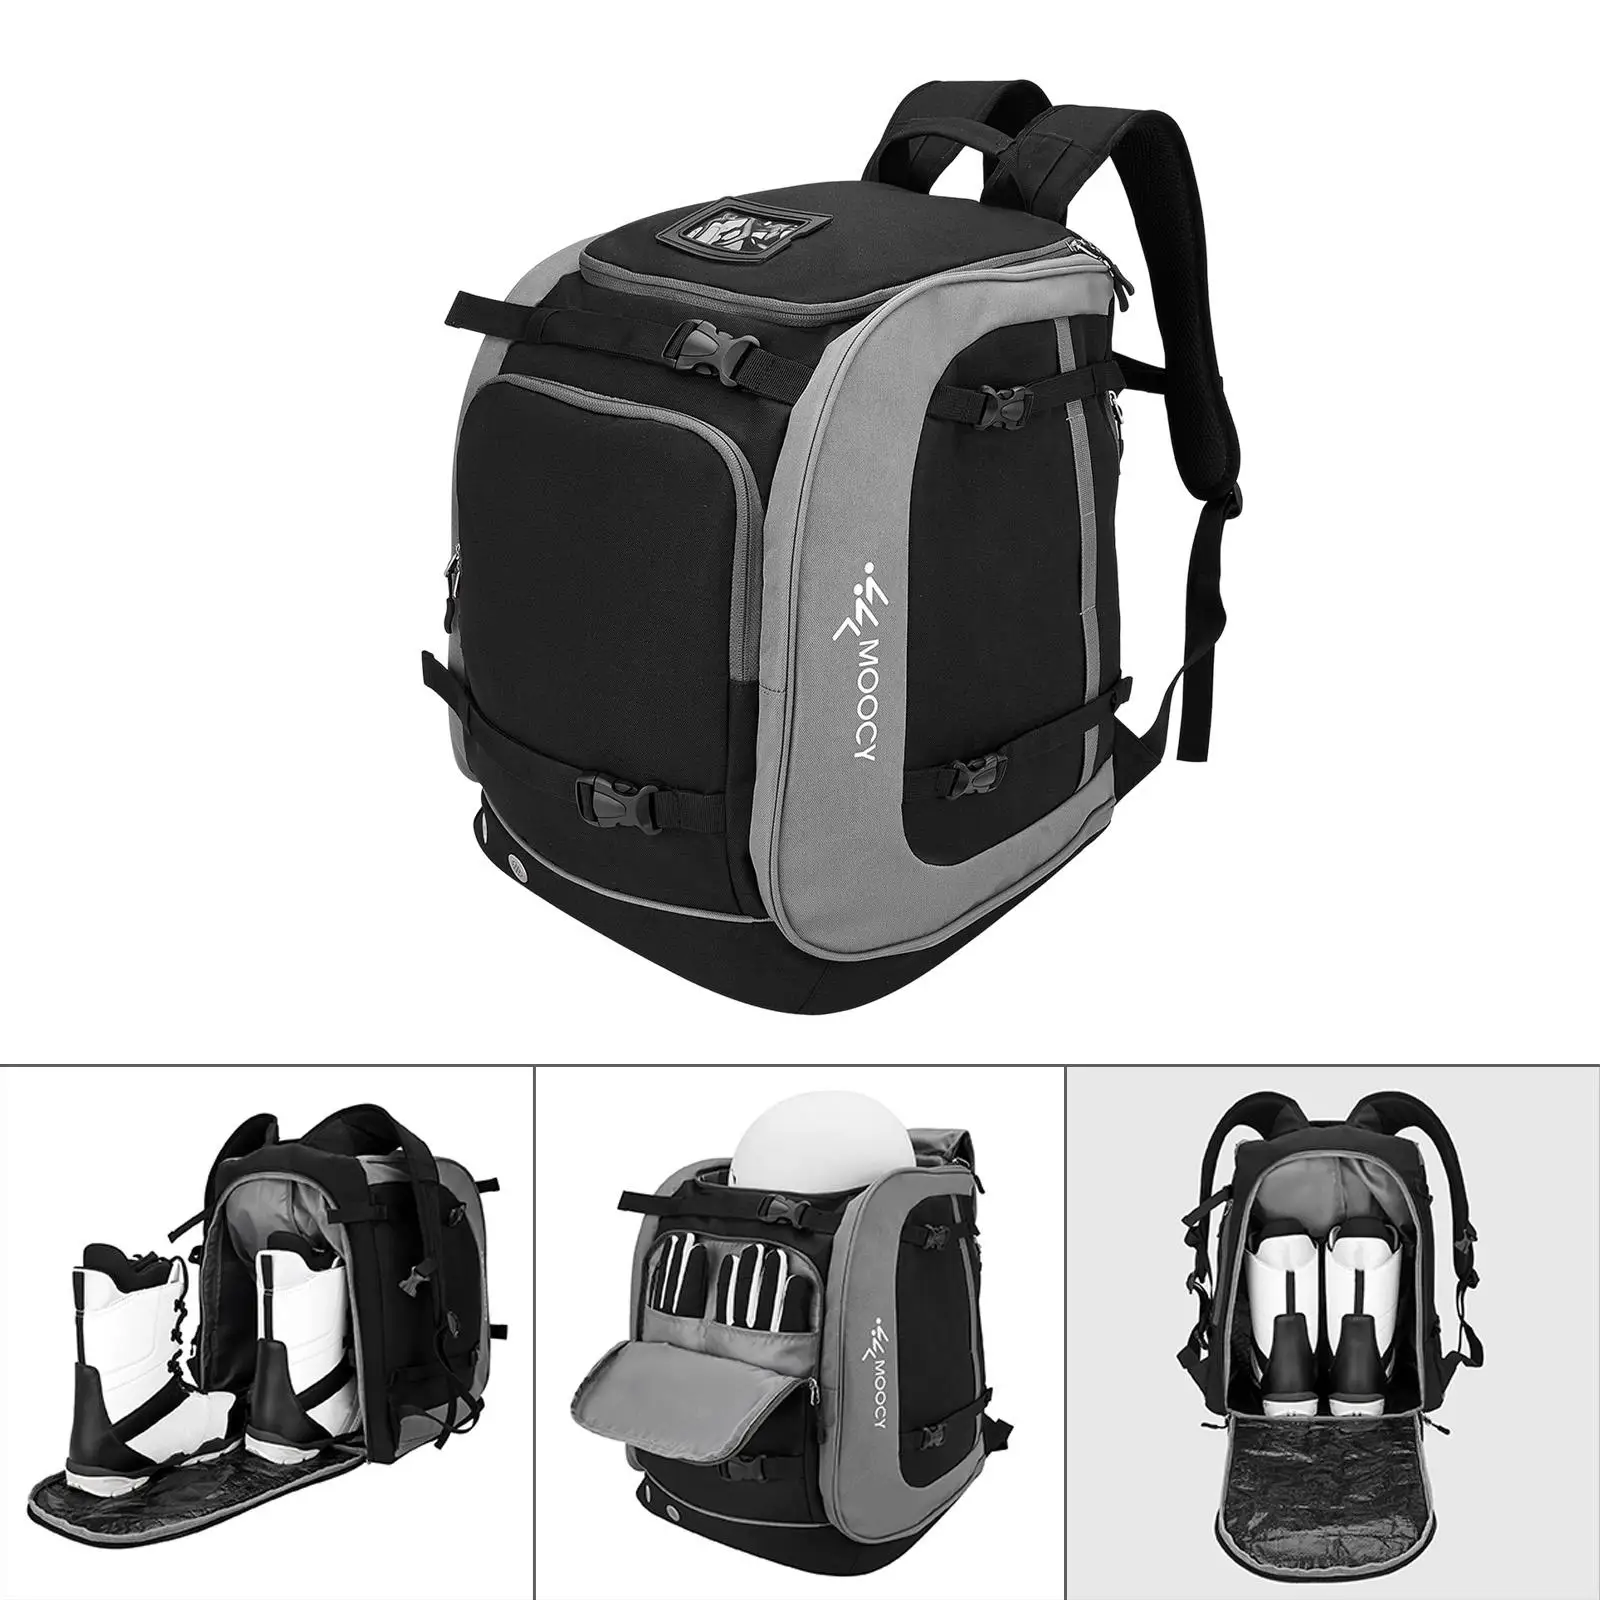 Durable 65L Ski Backpack Large Capacity Carrying Storage Bag Compartments for Snowboard Accessories Air Travel Skis Travel